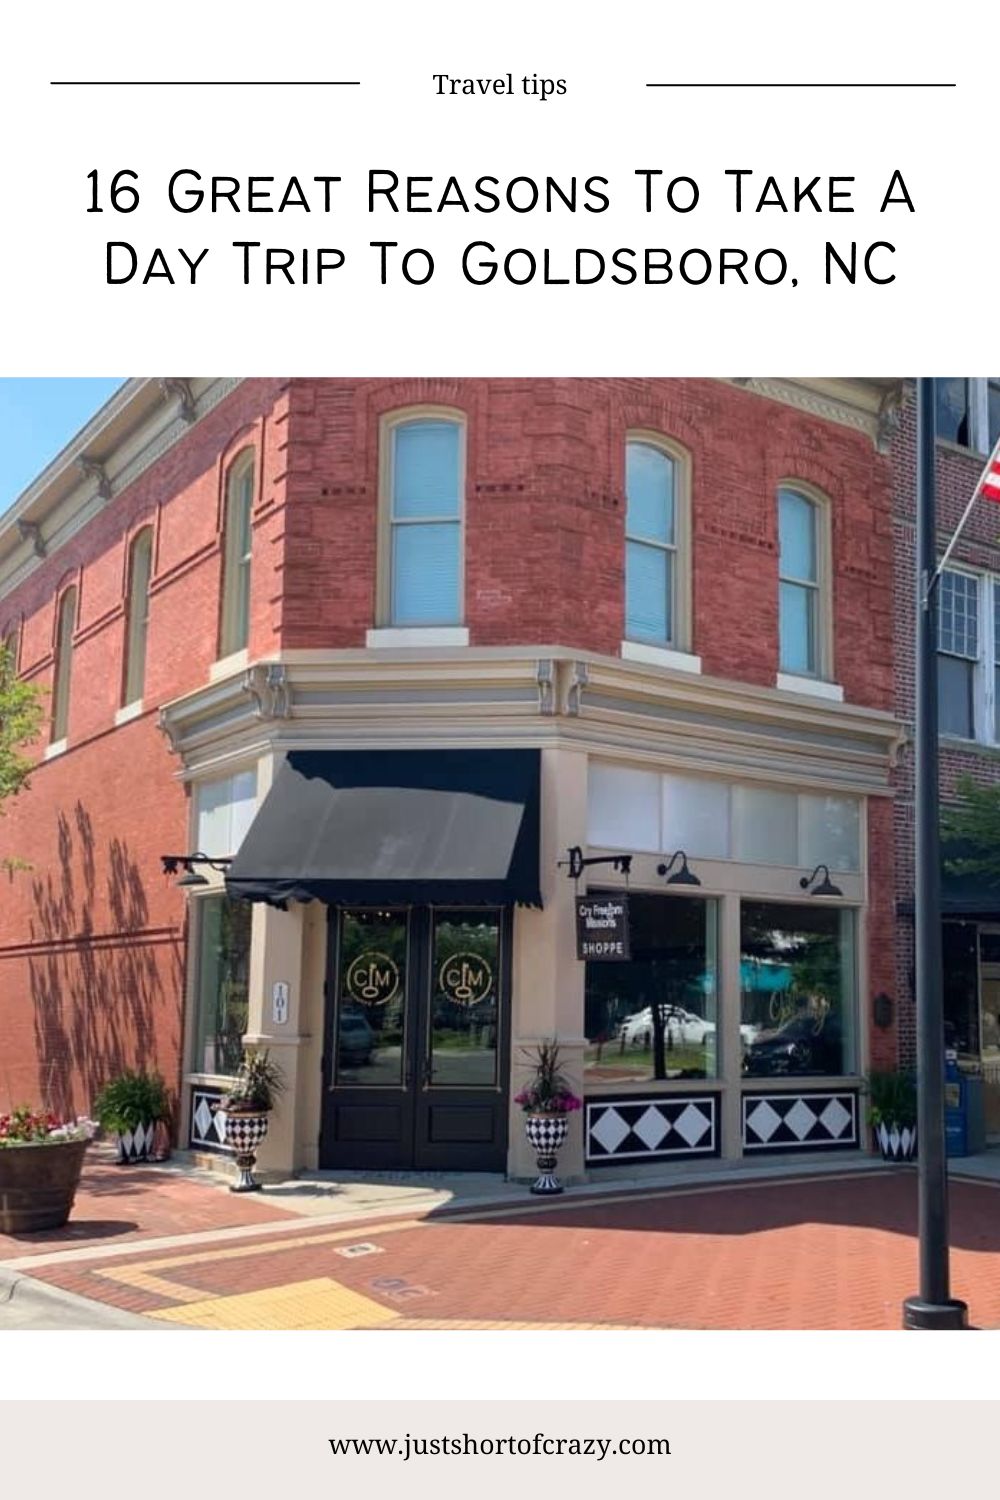 16 Great Reasons To Take A Day Trip To Goldsboro, NC